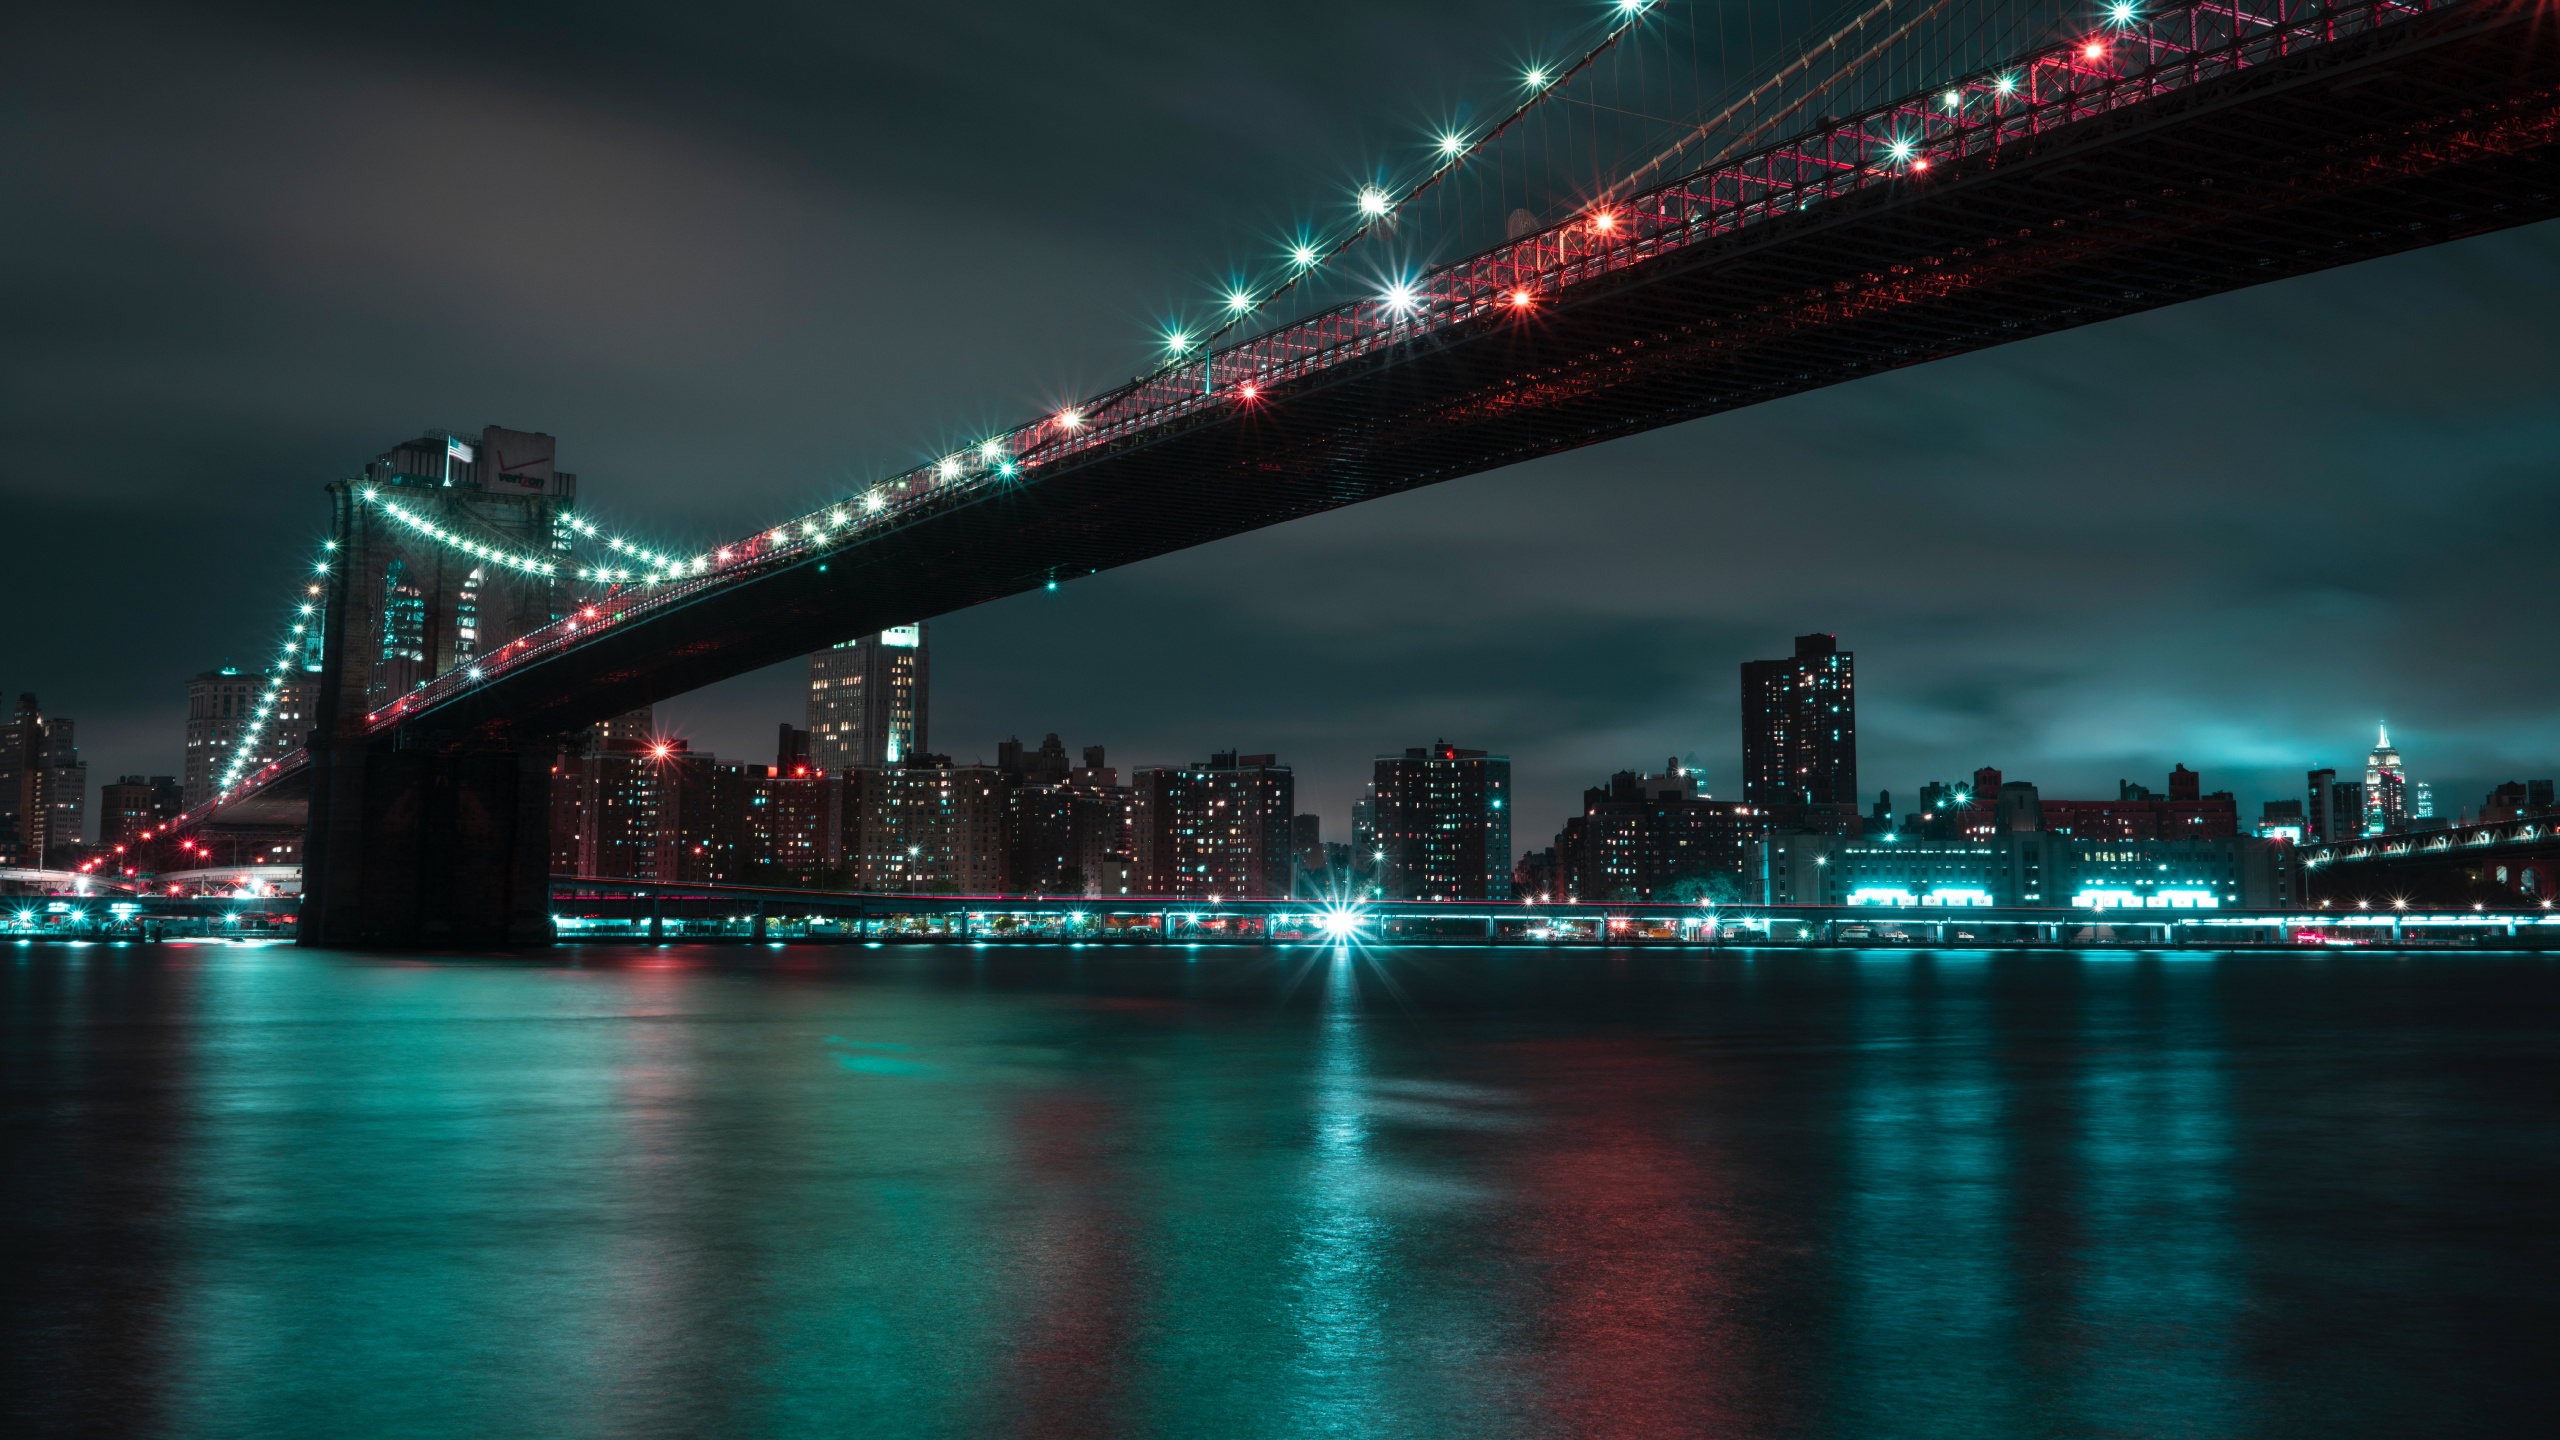 Bridge Over Water During Night Time. Wallpaper in 2560x1440 Resolution